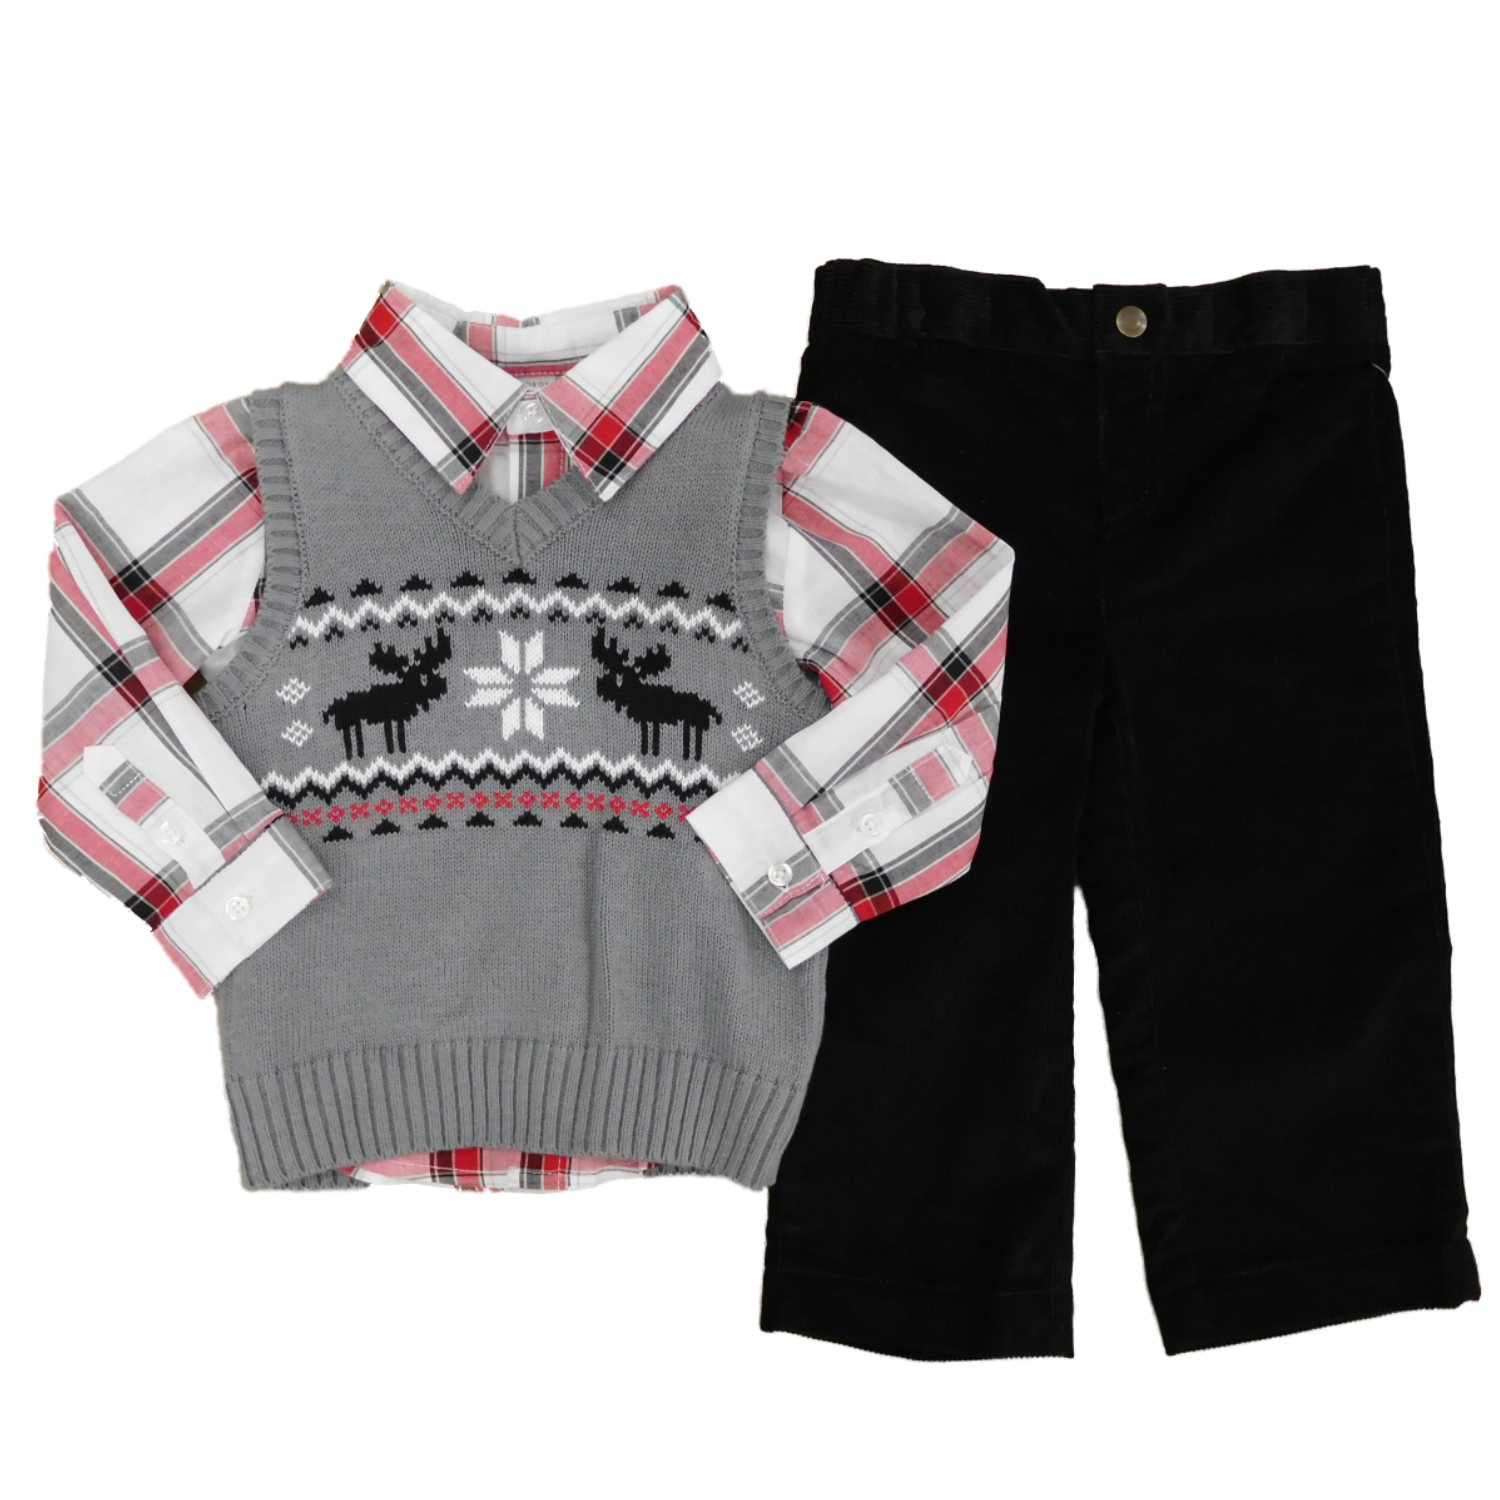 George Infant Boys 3P Holiday Outfit Gray Sweater Vest Shirt & Cord Pants